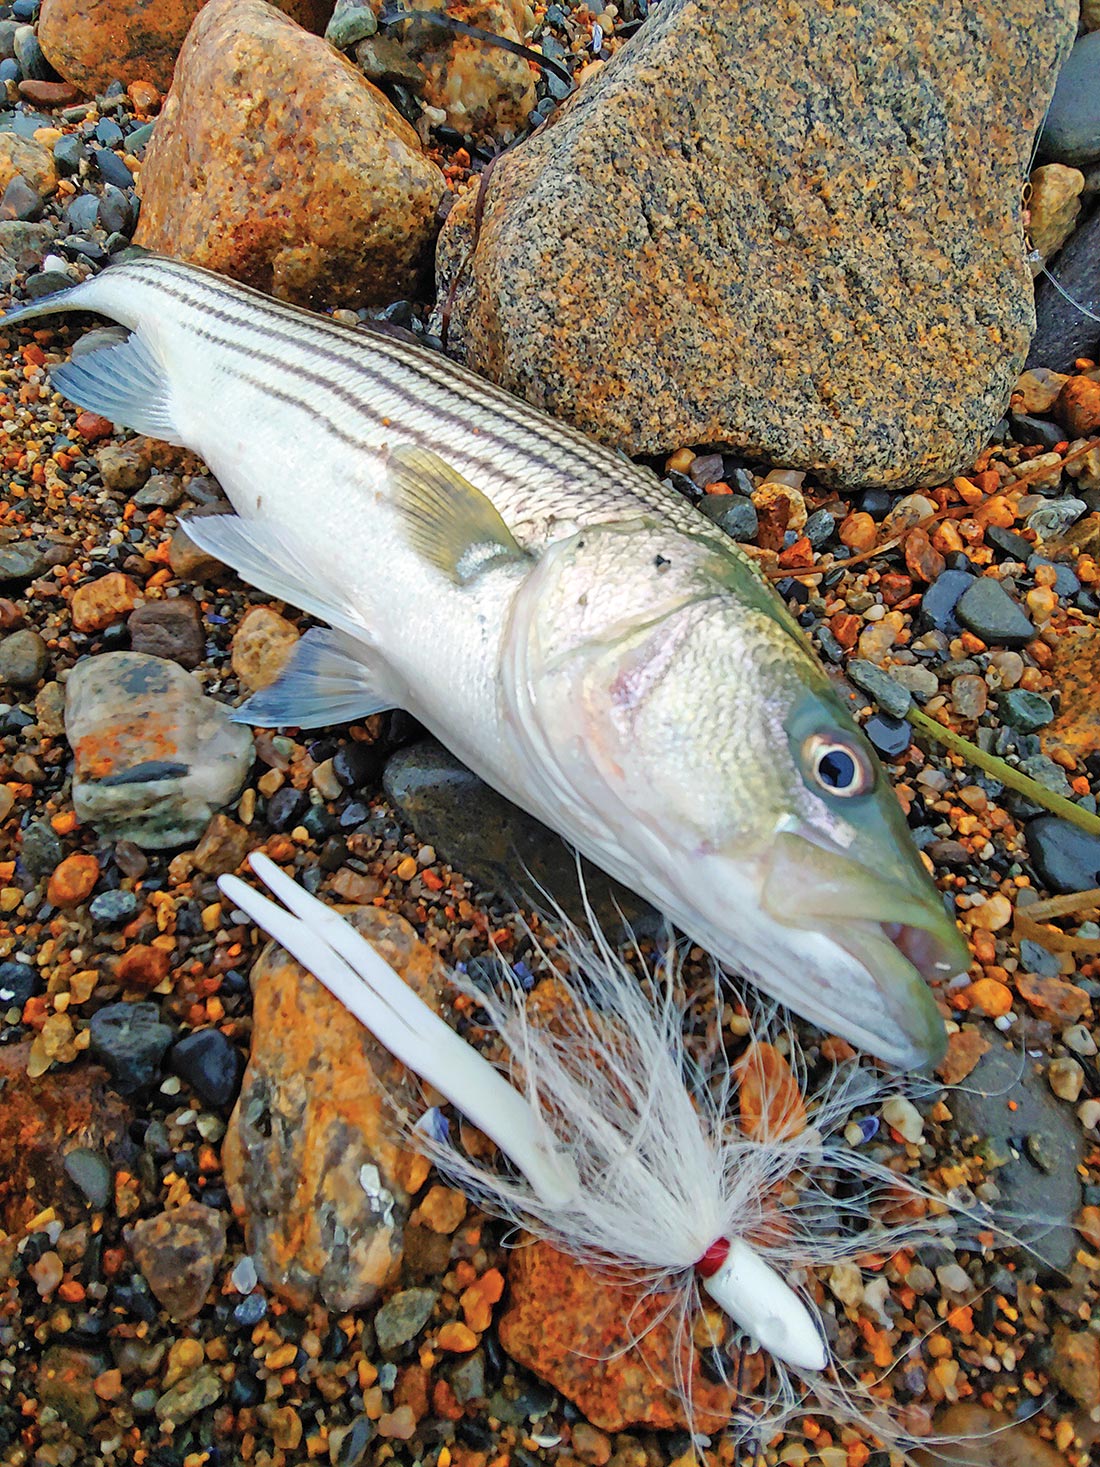 Got Jigs? Why Jigs are the Go-to Fishing Lure” for Catching